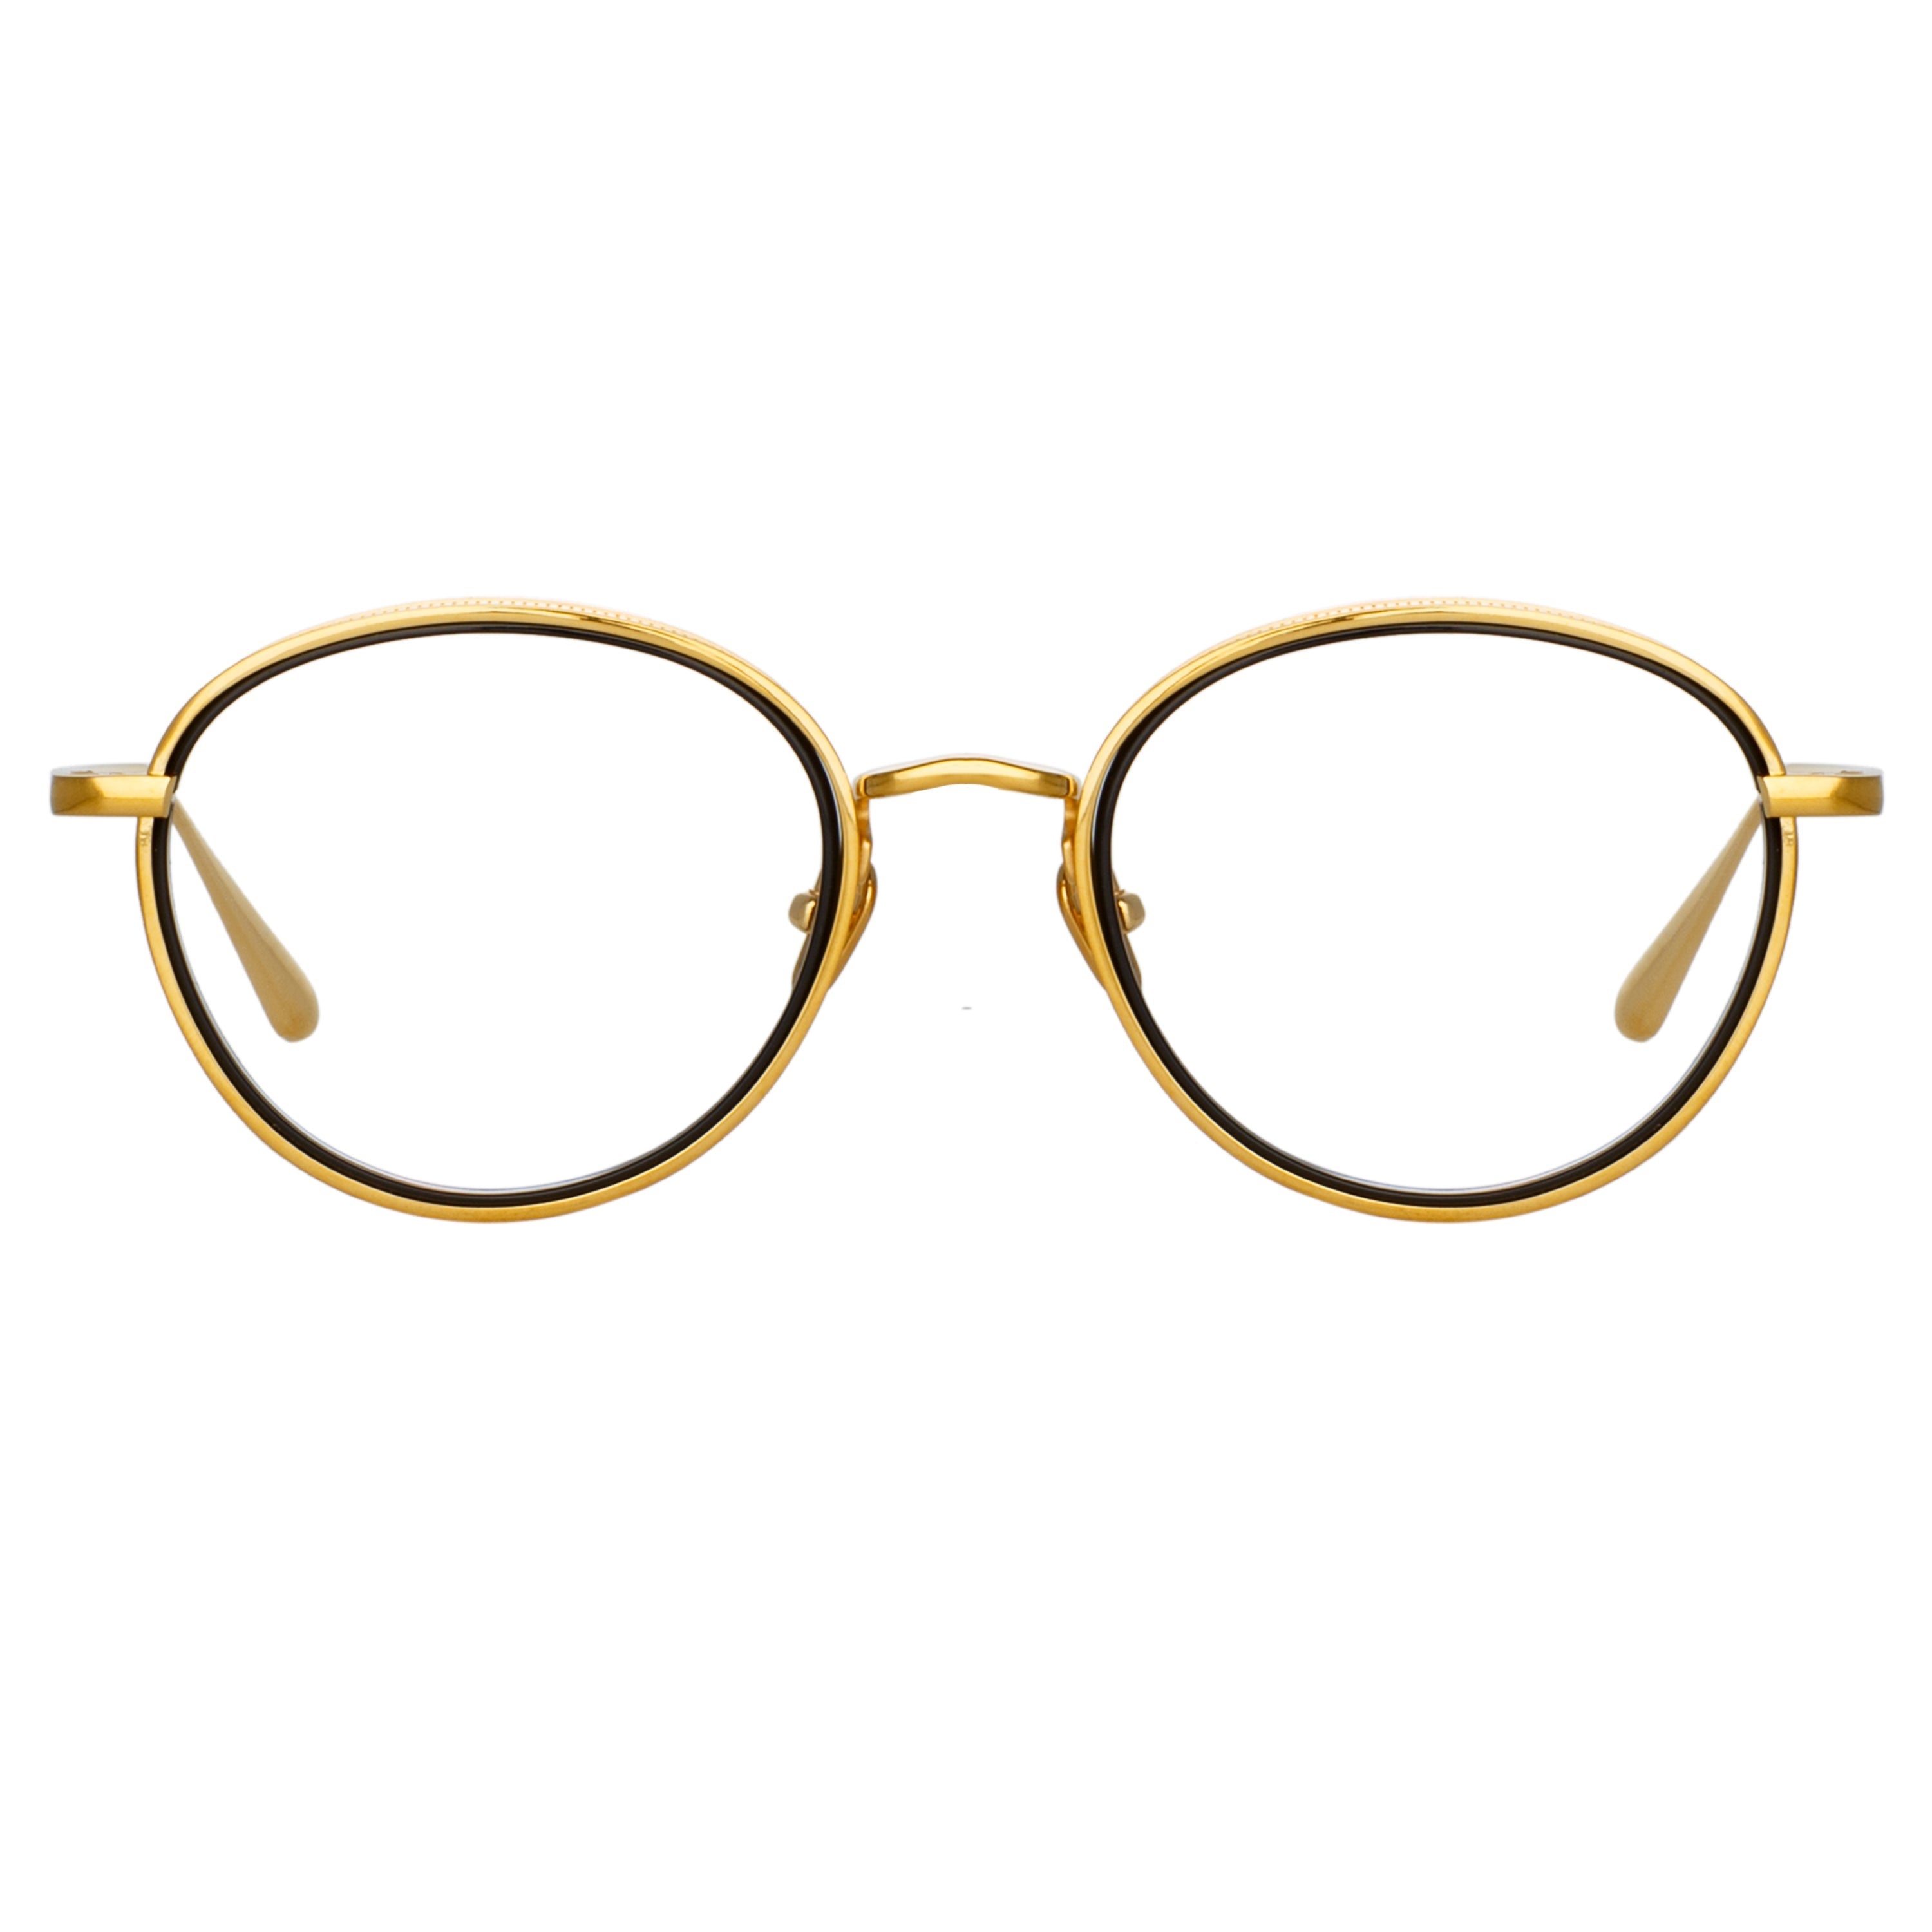 MOSS OVAL OPTICAL FRAME IN YELLOW GOLD - 1